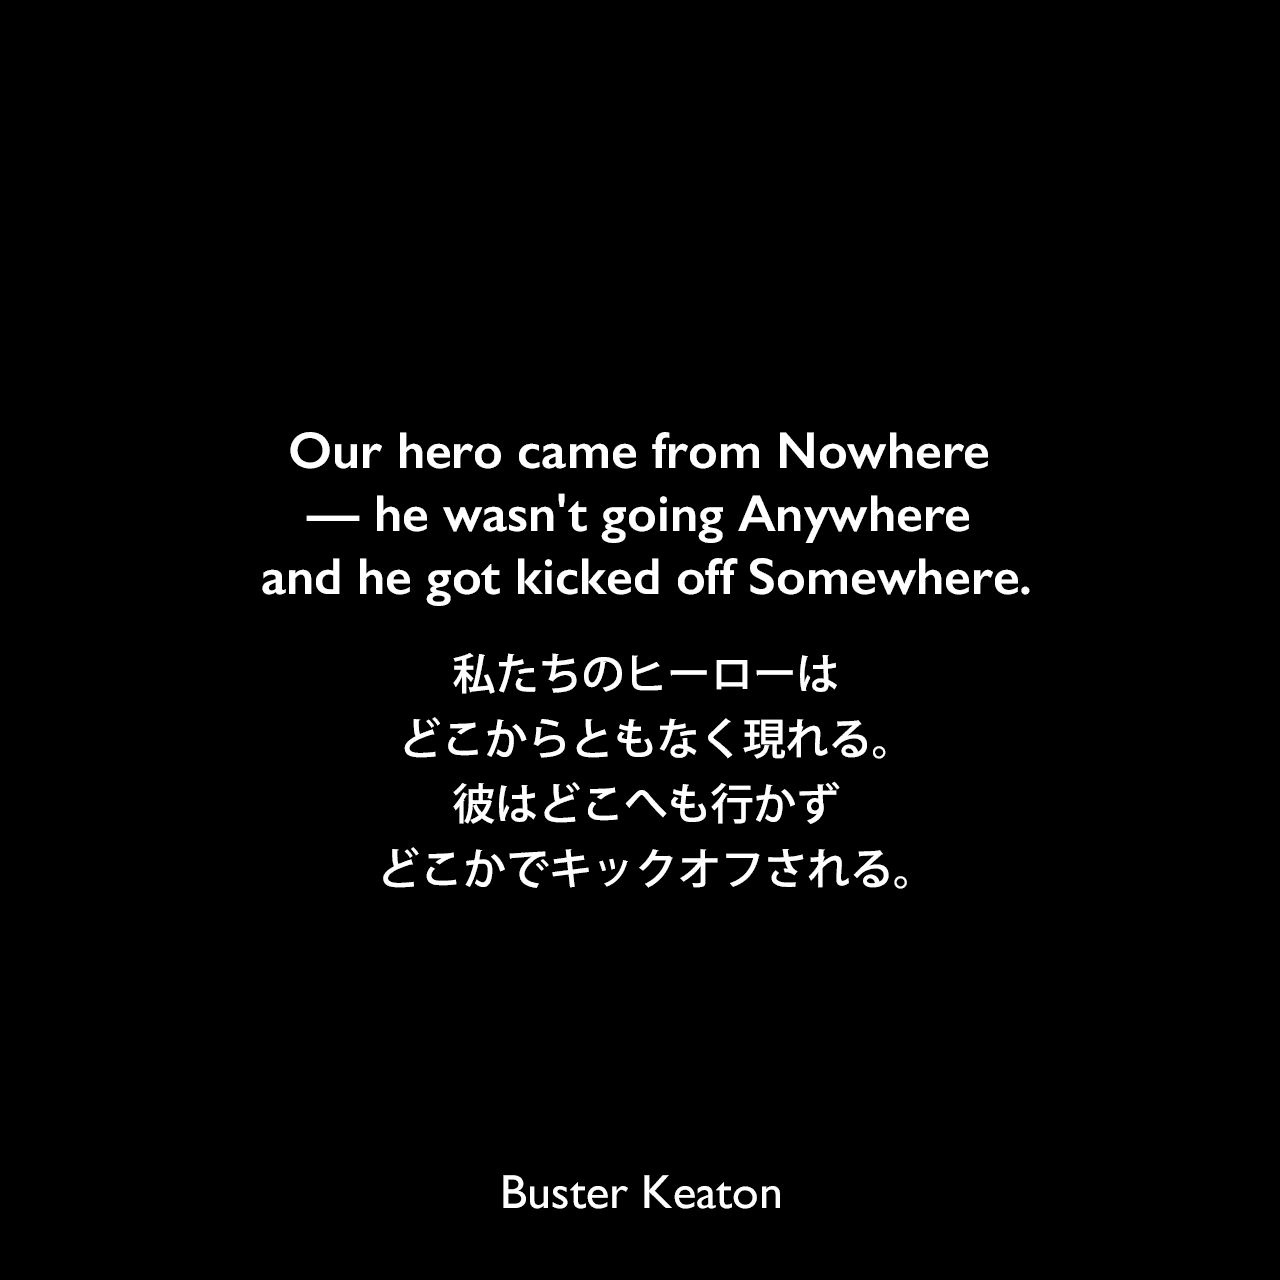 Our hero came from Nowhere — he wasn't going Anywhere and he got kicked off Somewhere.私たちのヒーローはどこからともなく現れる。彼はどこへも行かずどこかでキックオフされる。- 映画The High SignよりBuster Keaton